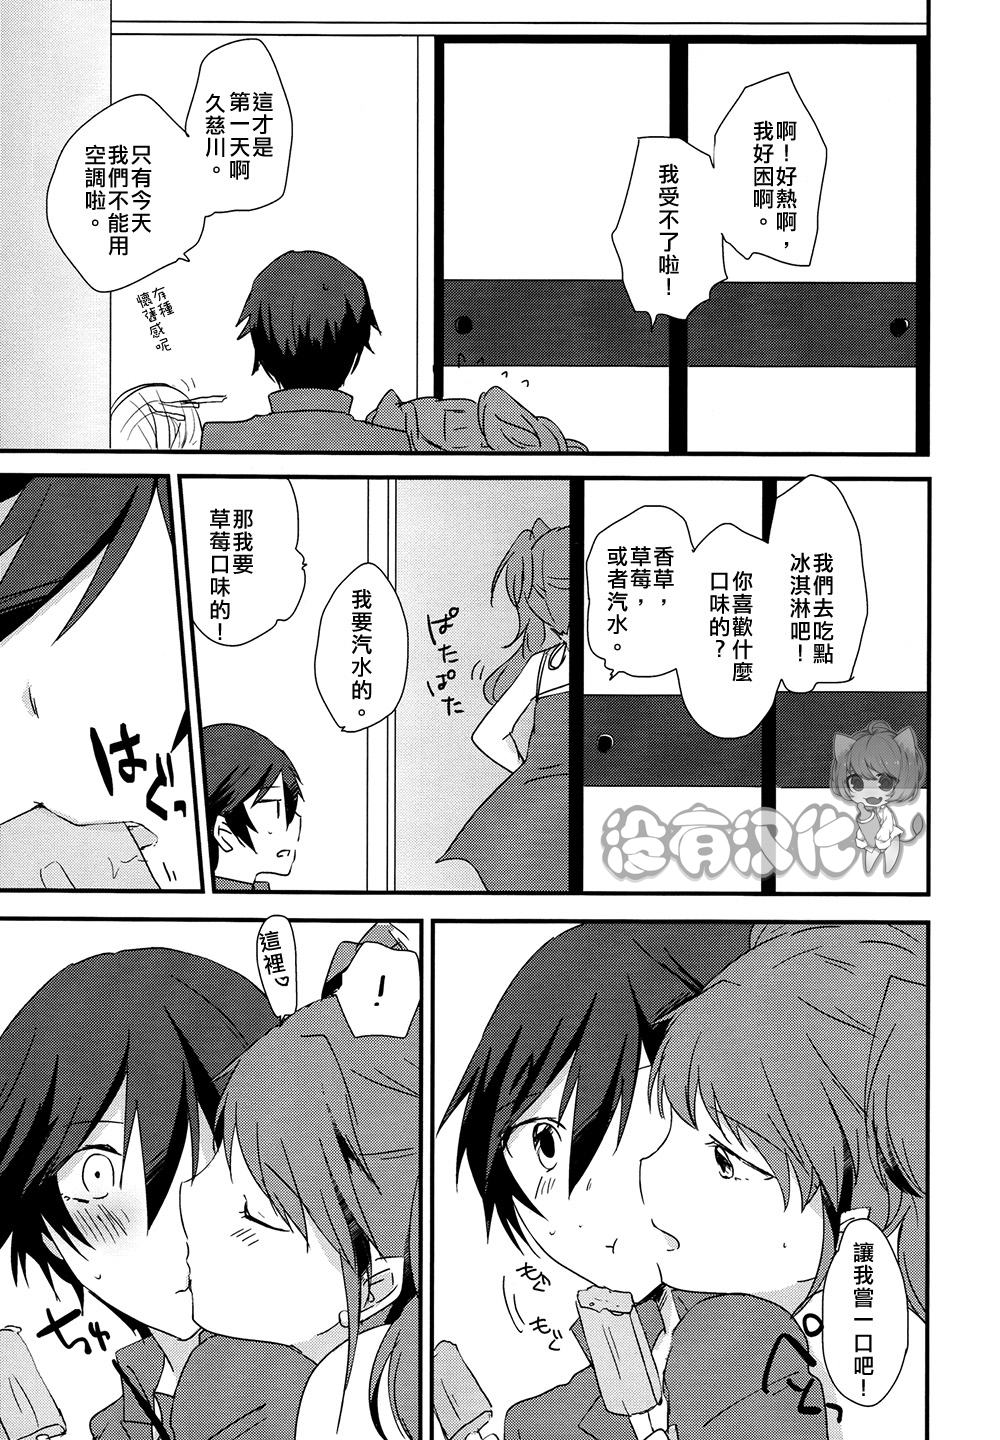 (C88) [MEGANE81 (Shinocco)] Eighteen Emotion (Persona 4) [Chinese] [沒有漢化] page 17 full